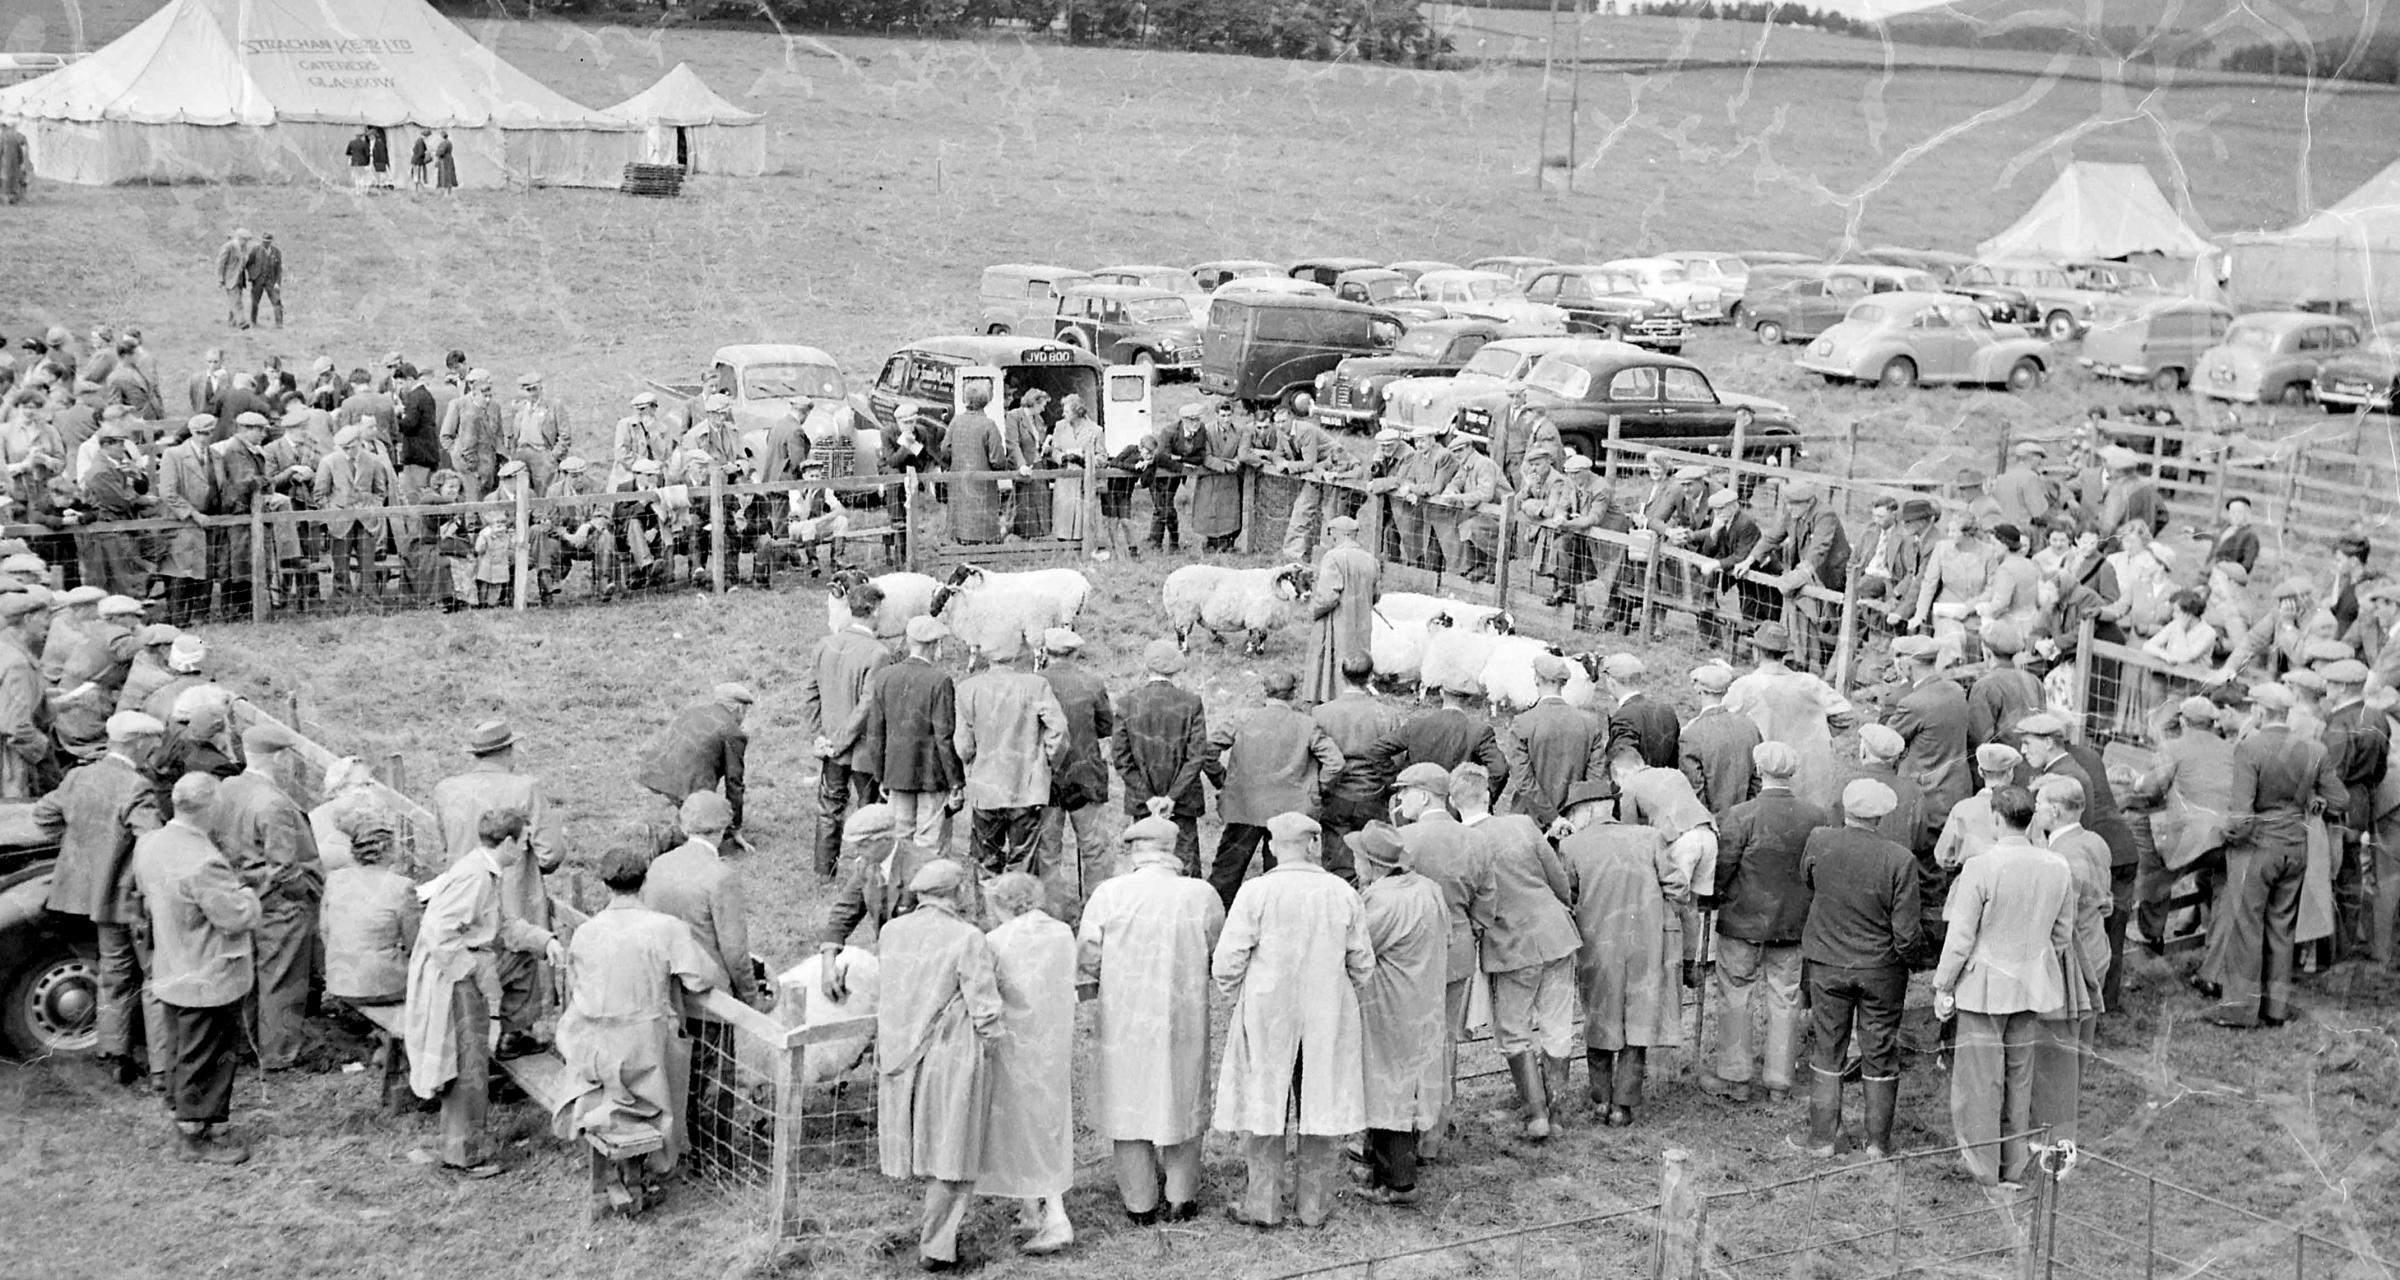 A busy ringside at Abington Show in 1958 – it remains a fiercely contested Blackface championship on the show circuit